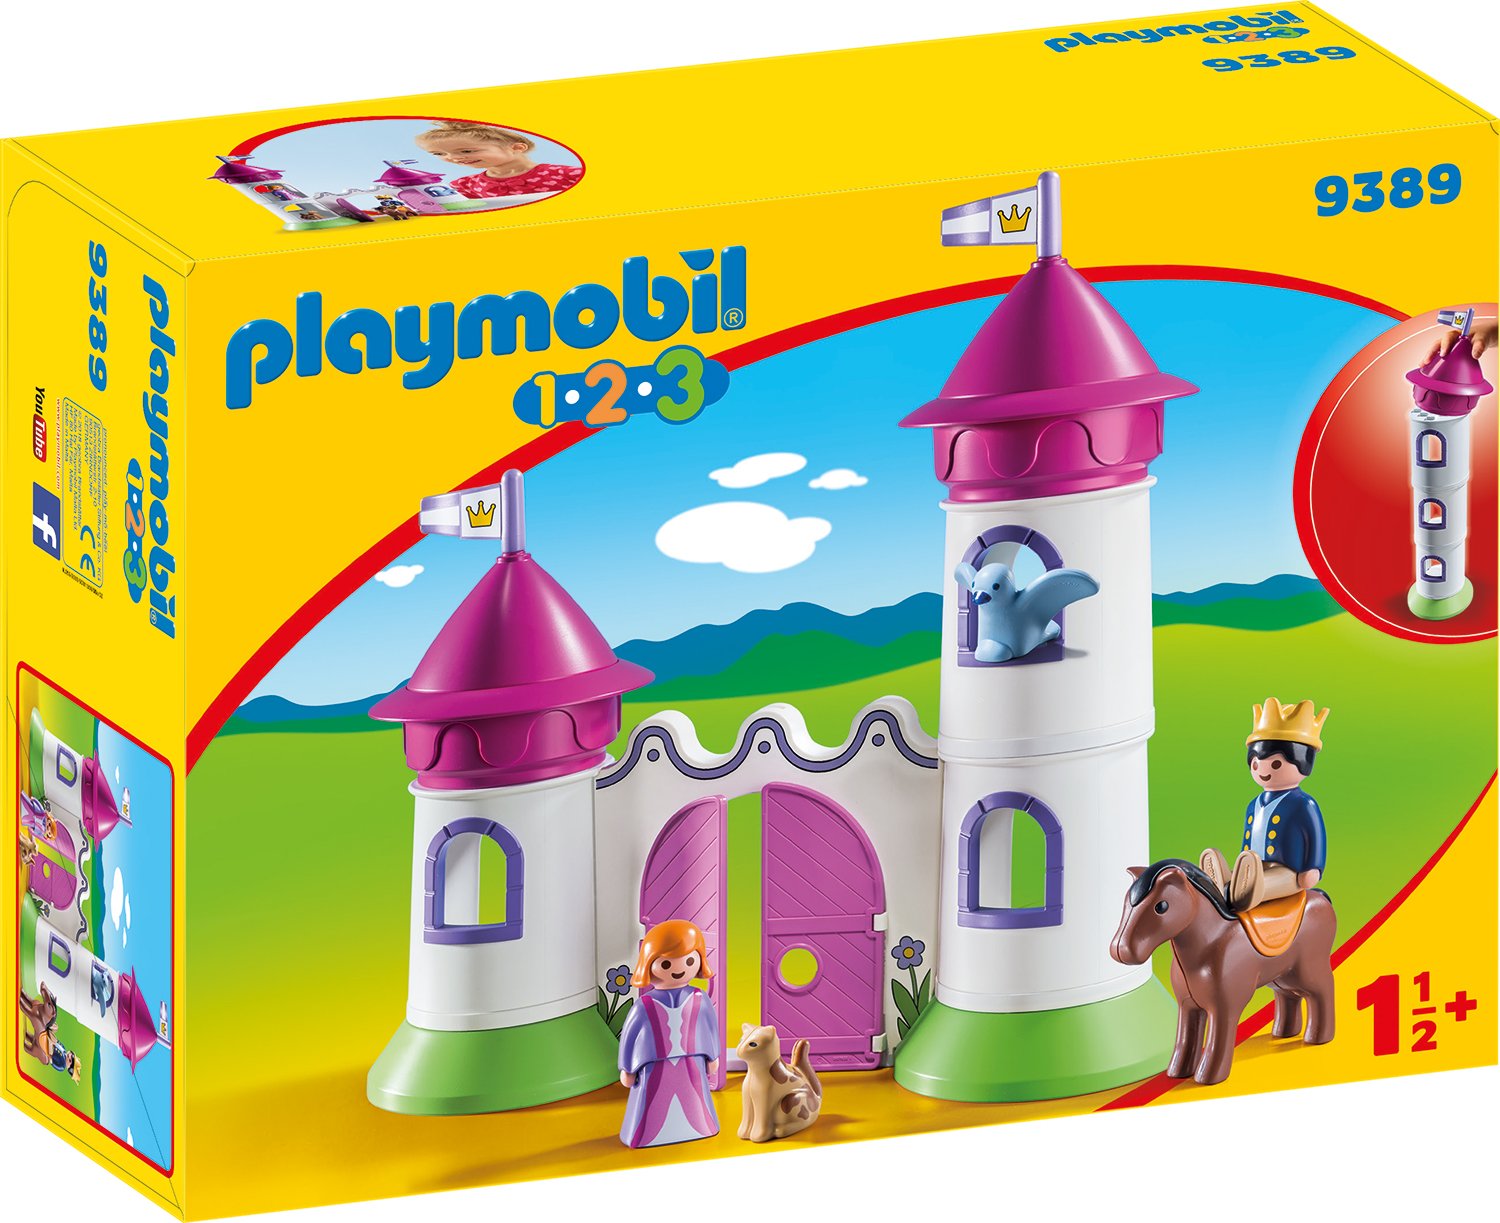 Playmobil Small Ch Teau With Stacking Tower Game